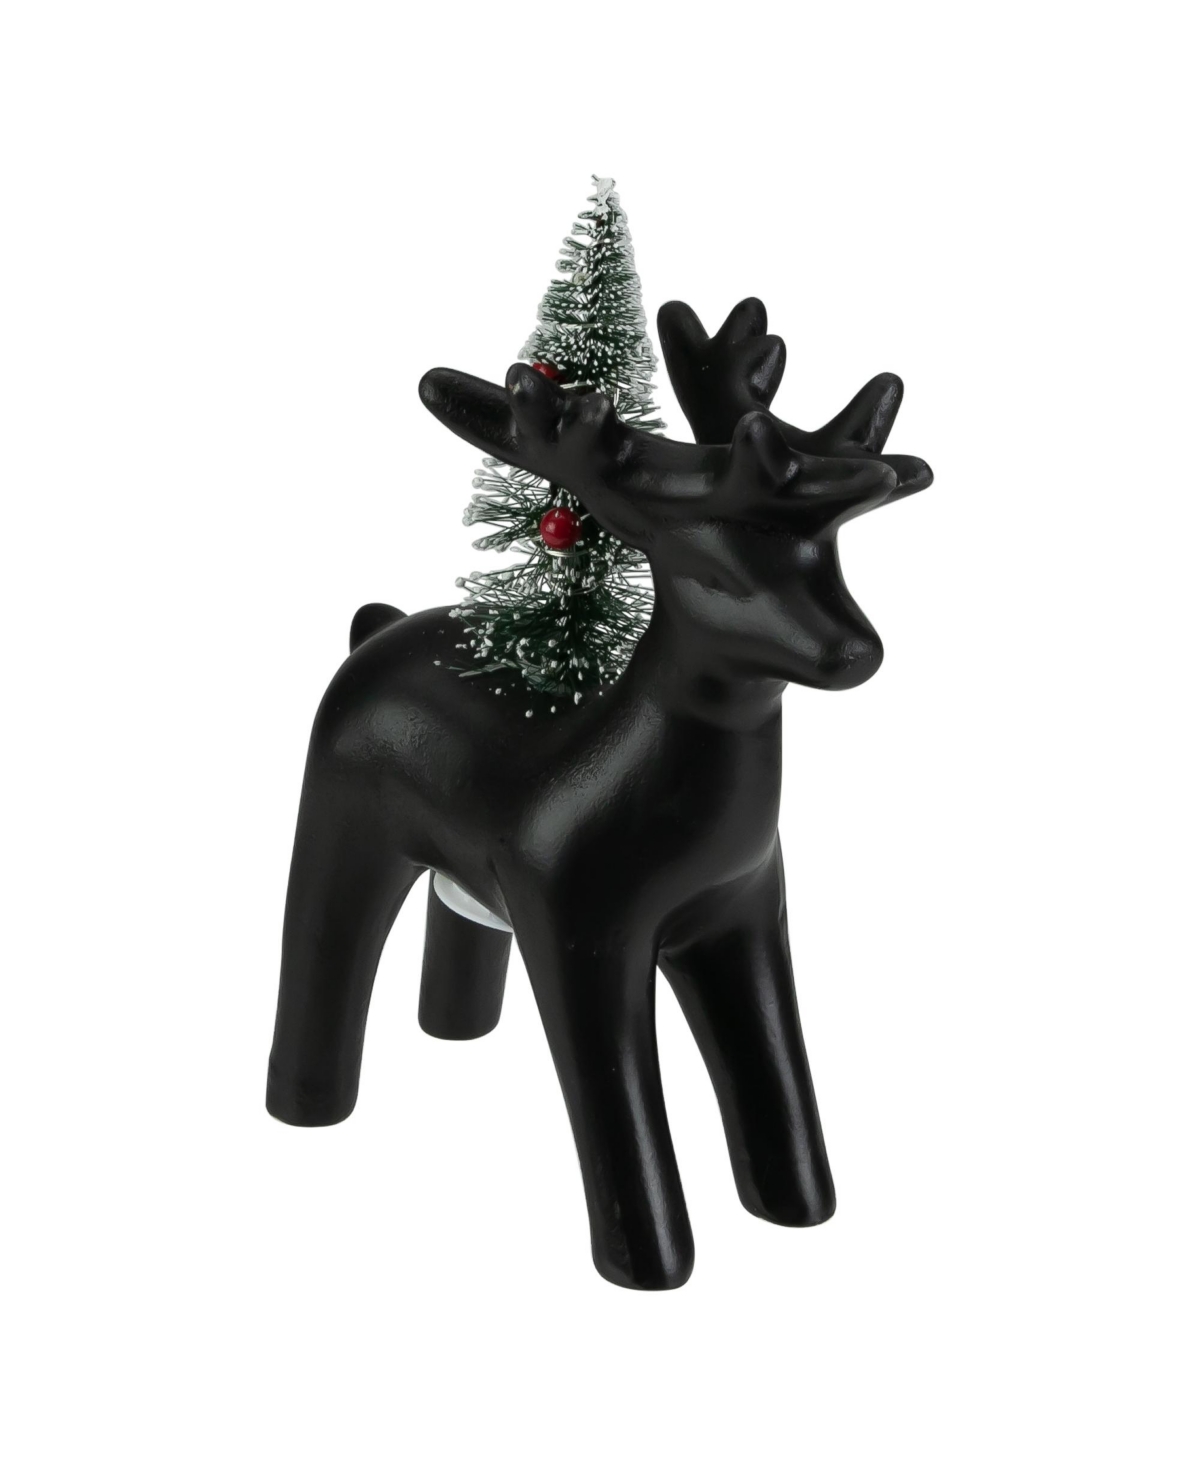 Northlight Led Lighted Ceramic Standing Reindeer With Christmas Tree Warm White Lights, 7.5" In Black